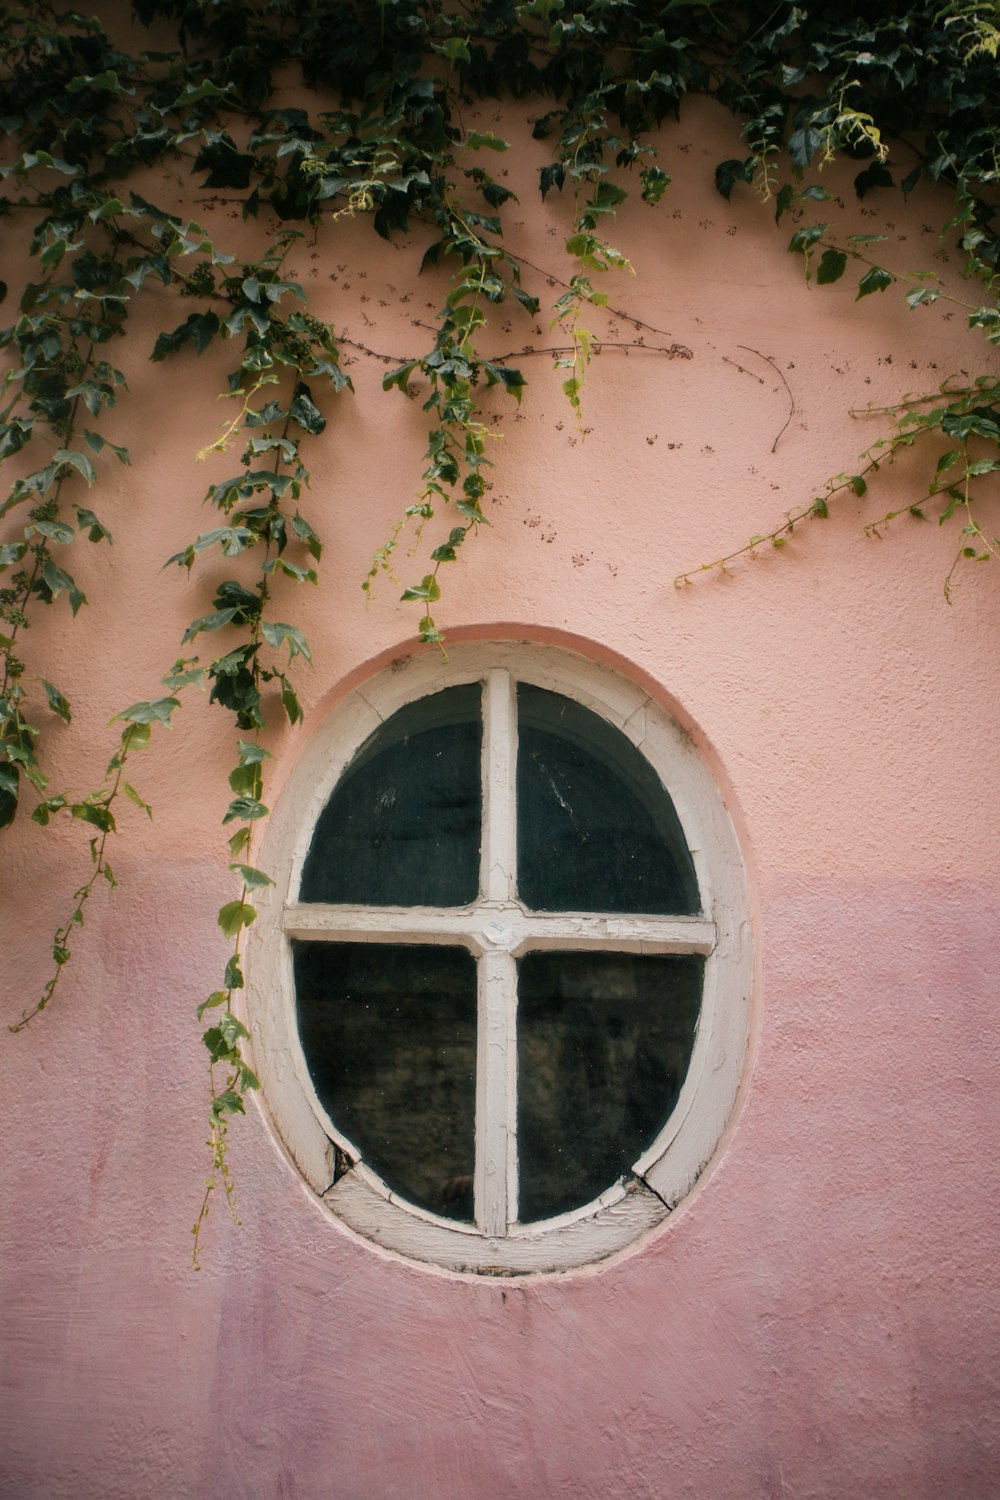 a window on a pink wall with ivy growing on it